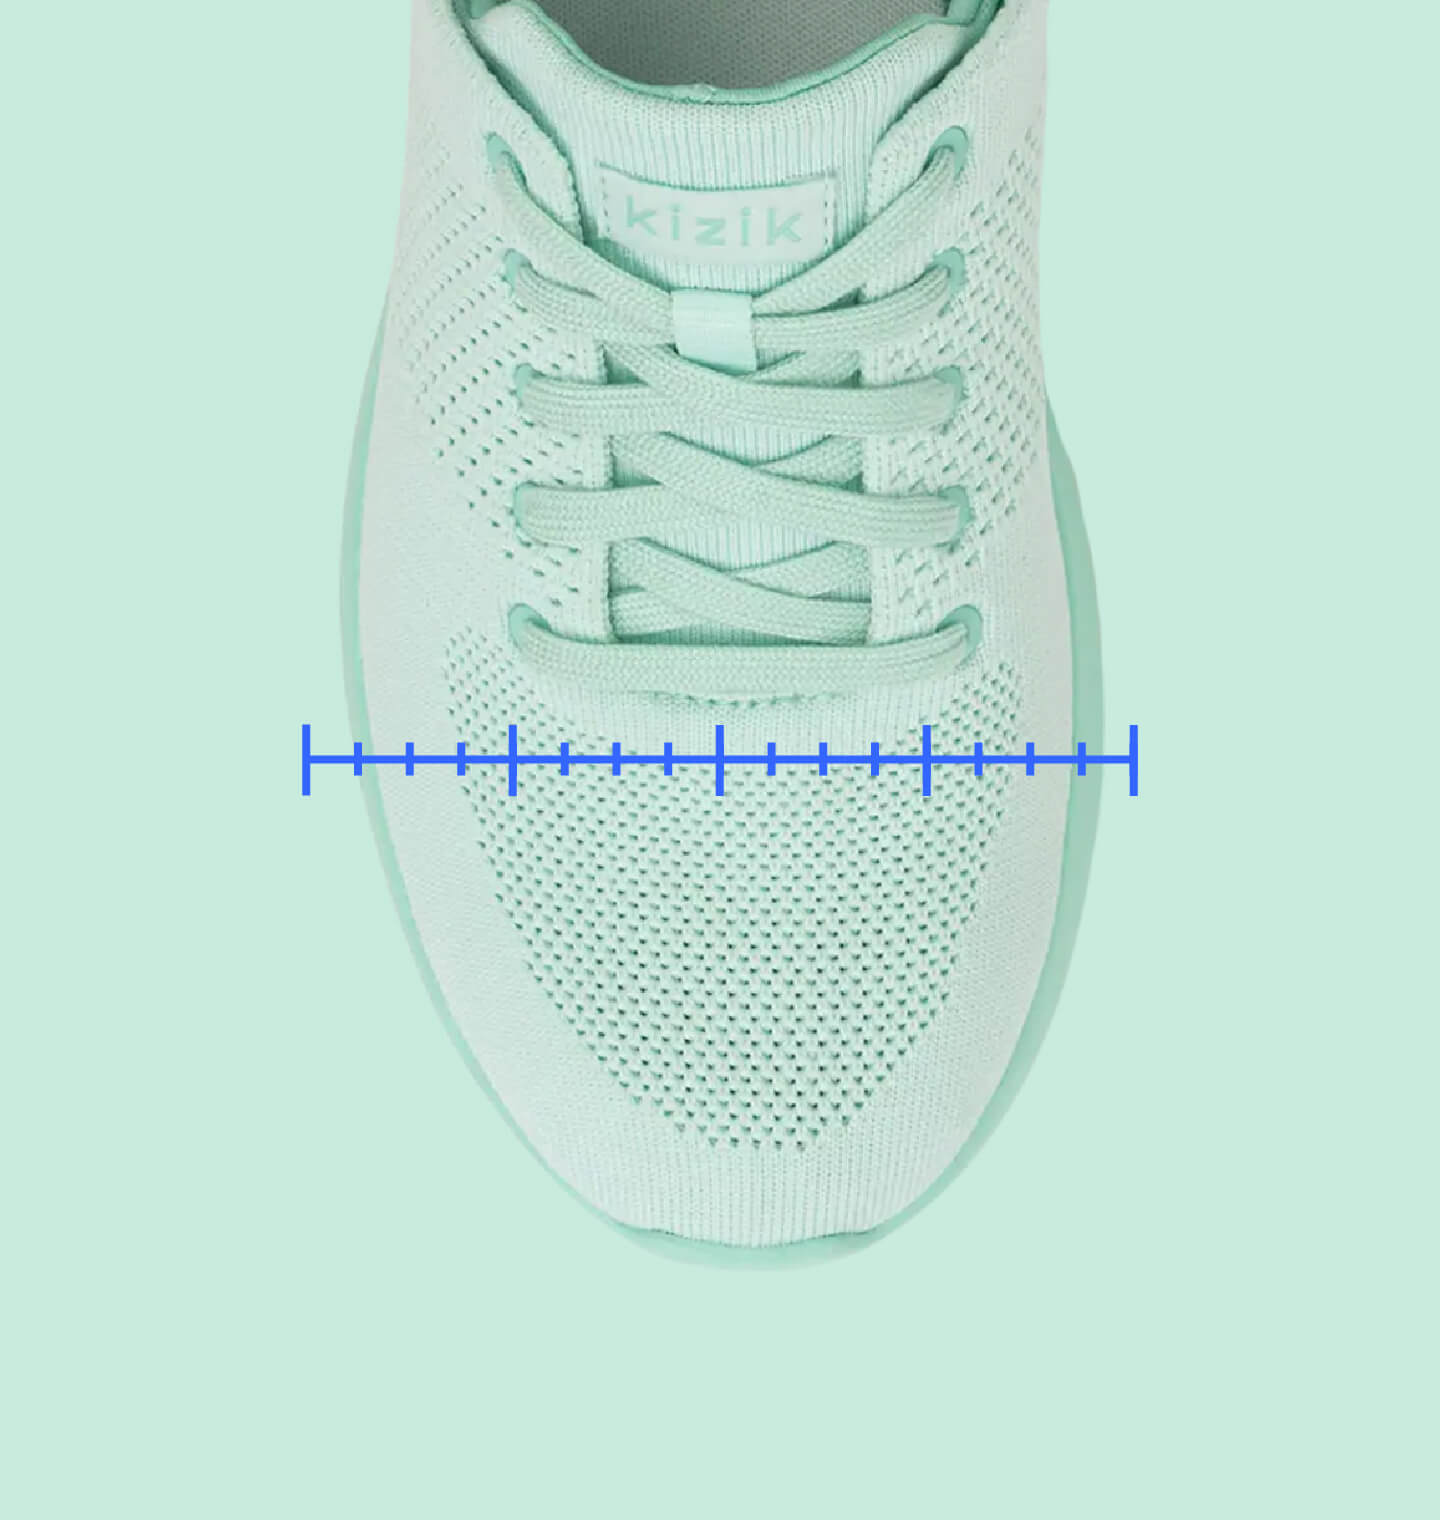 How to Measure Your Foot to Find the Right Shoe Size. Nike ZA